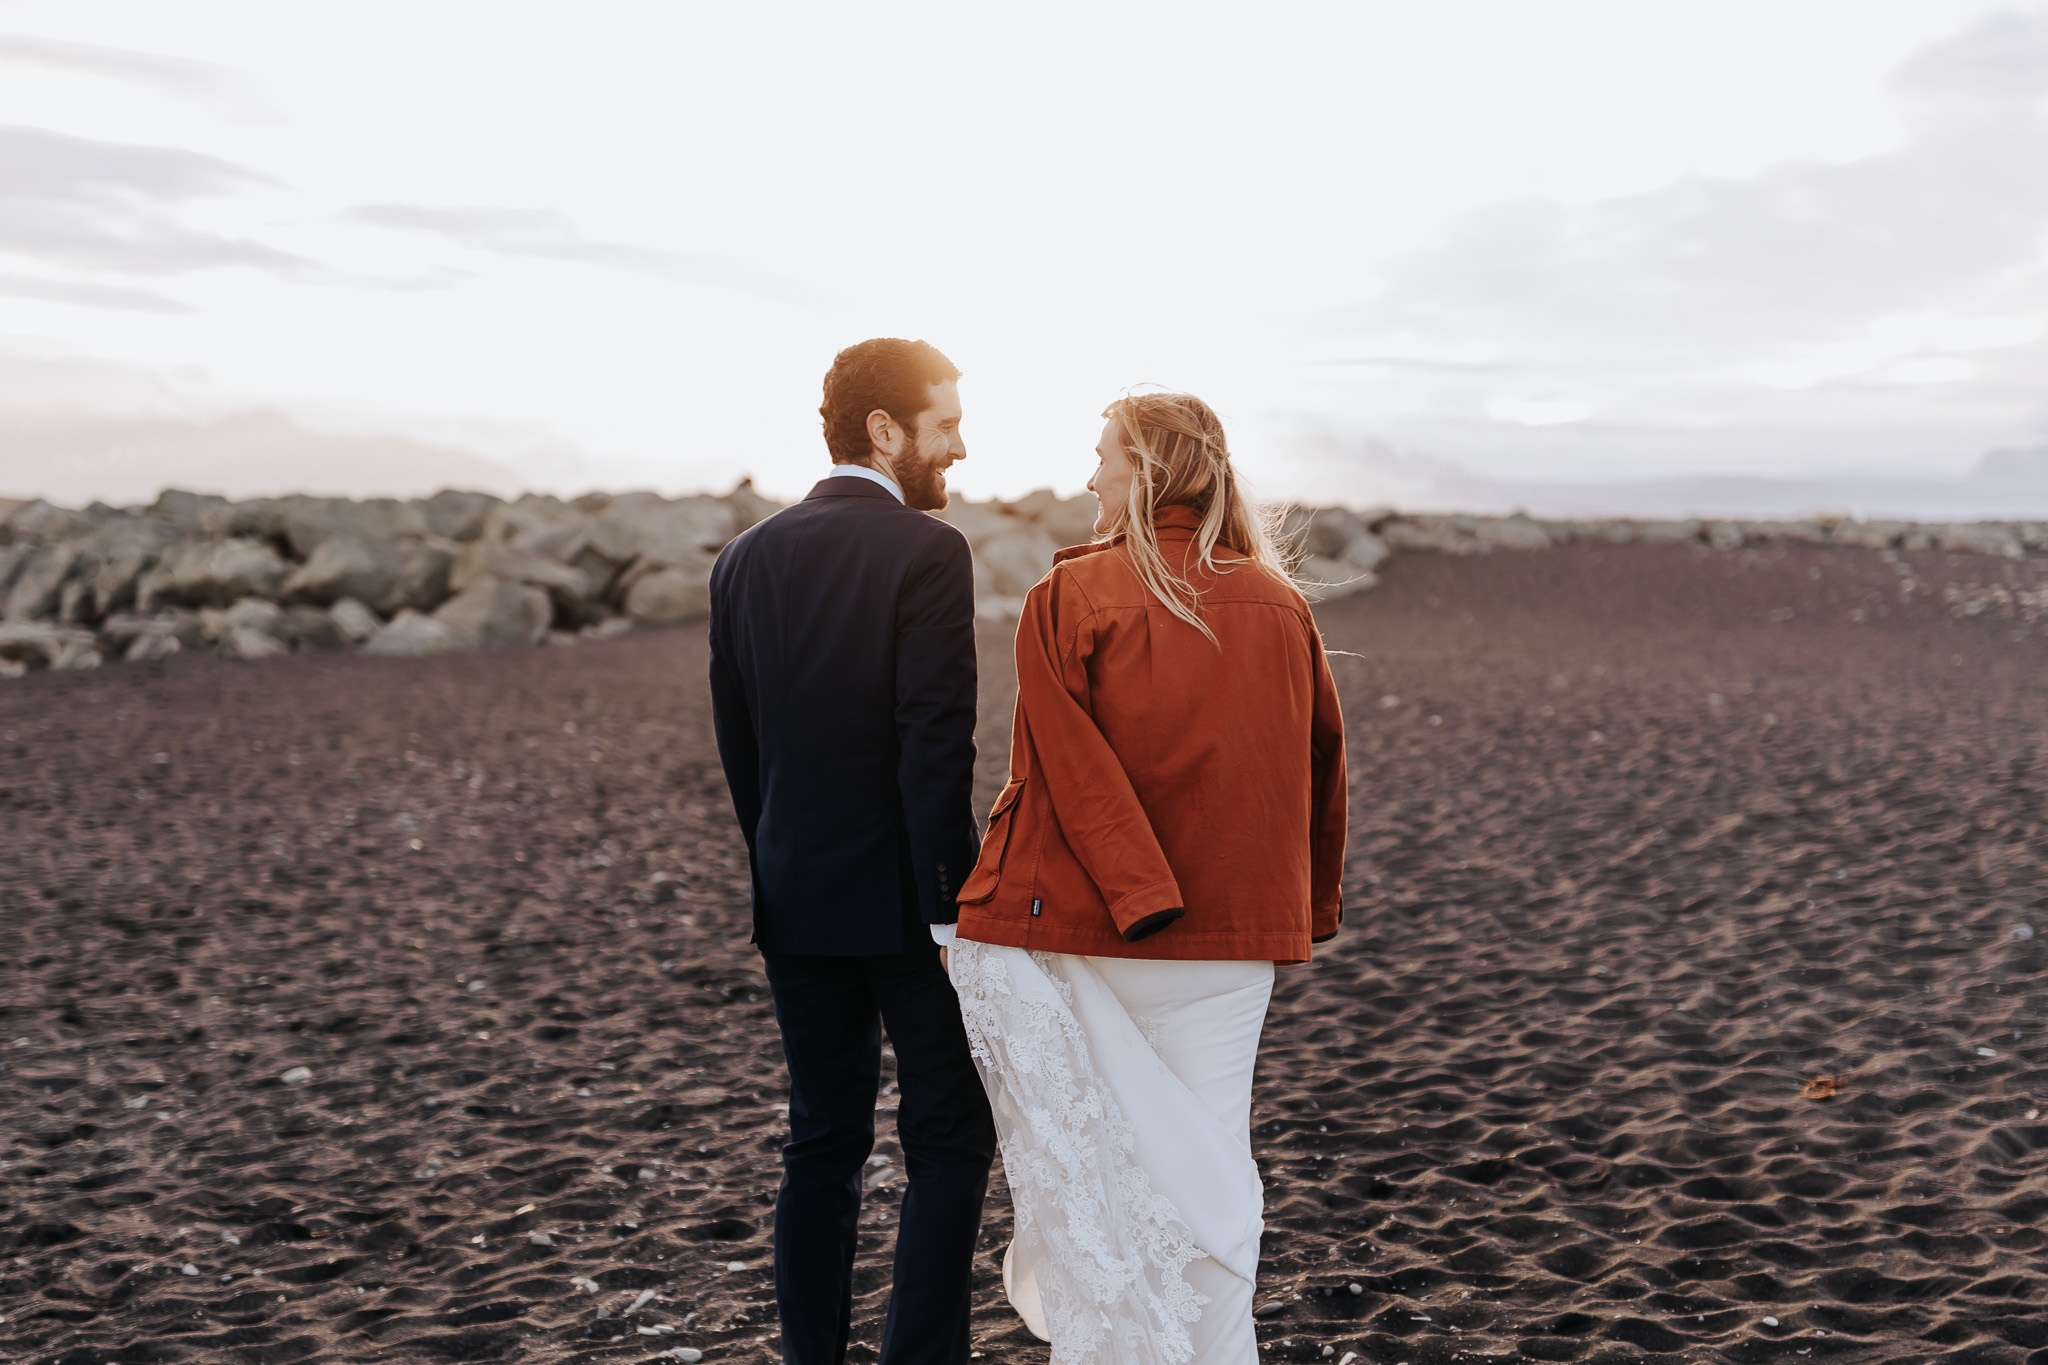 Iceland elopement photographer captures couple walking hand in hand on beach